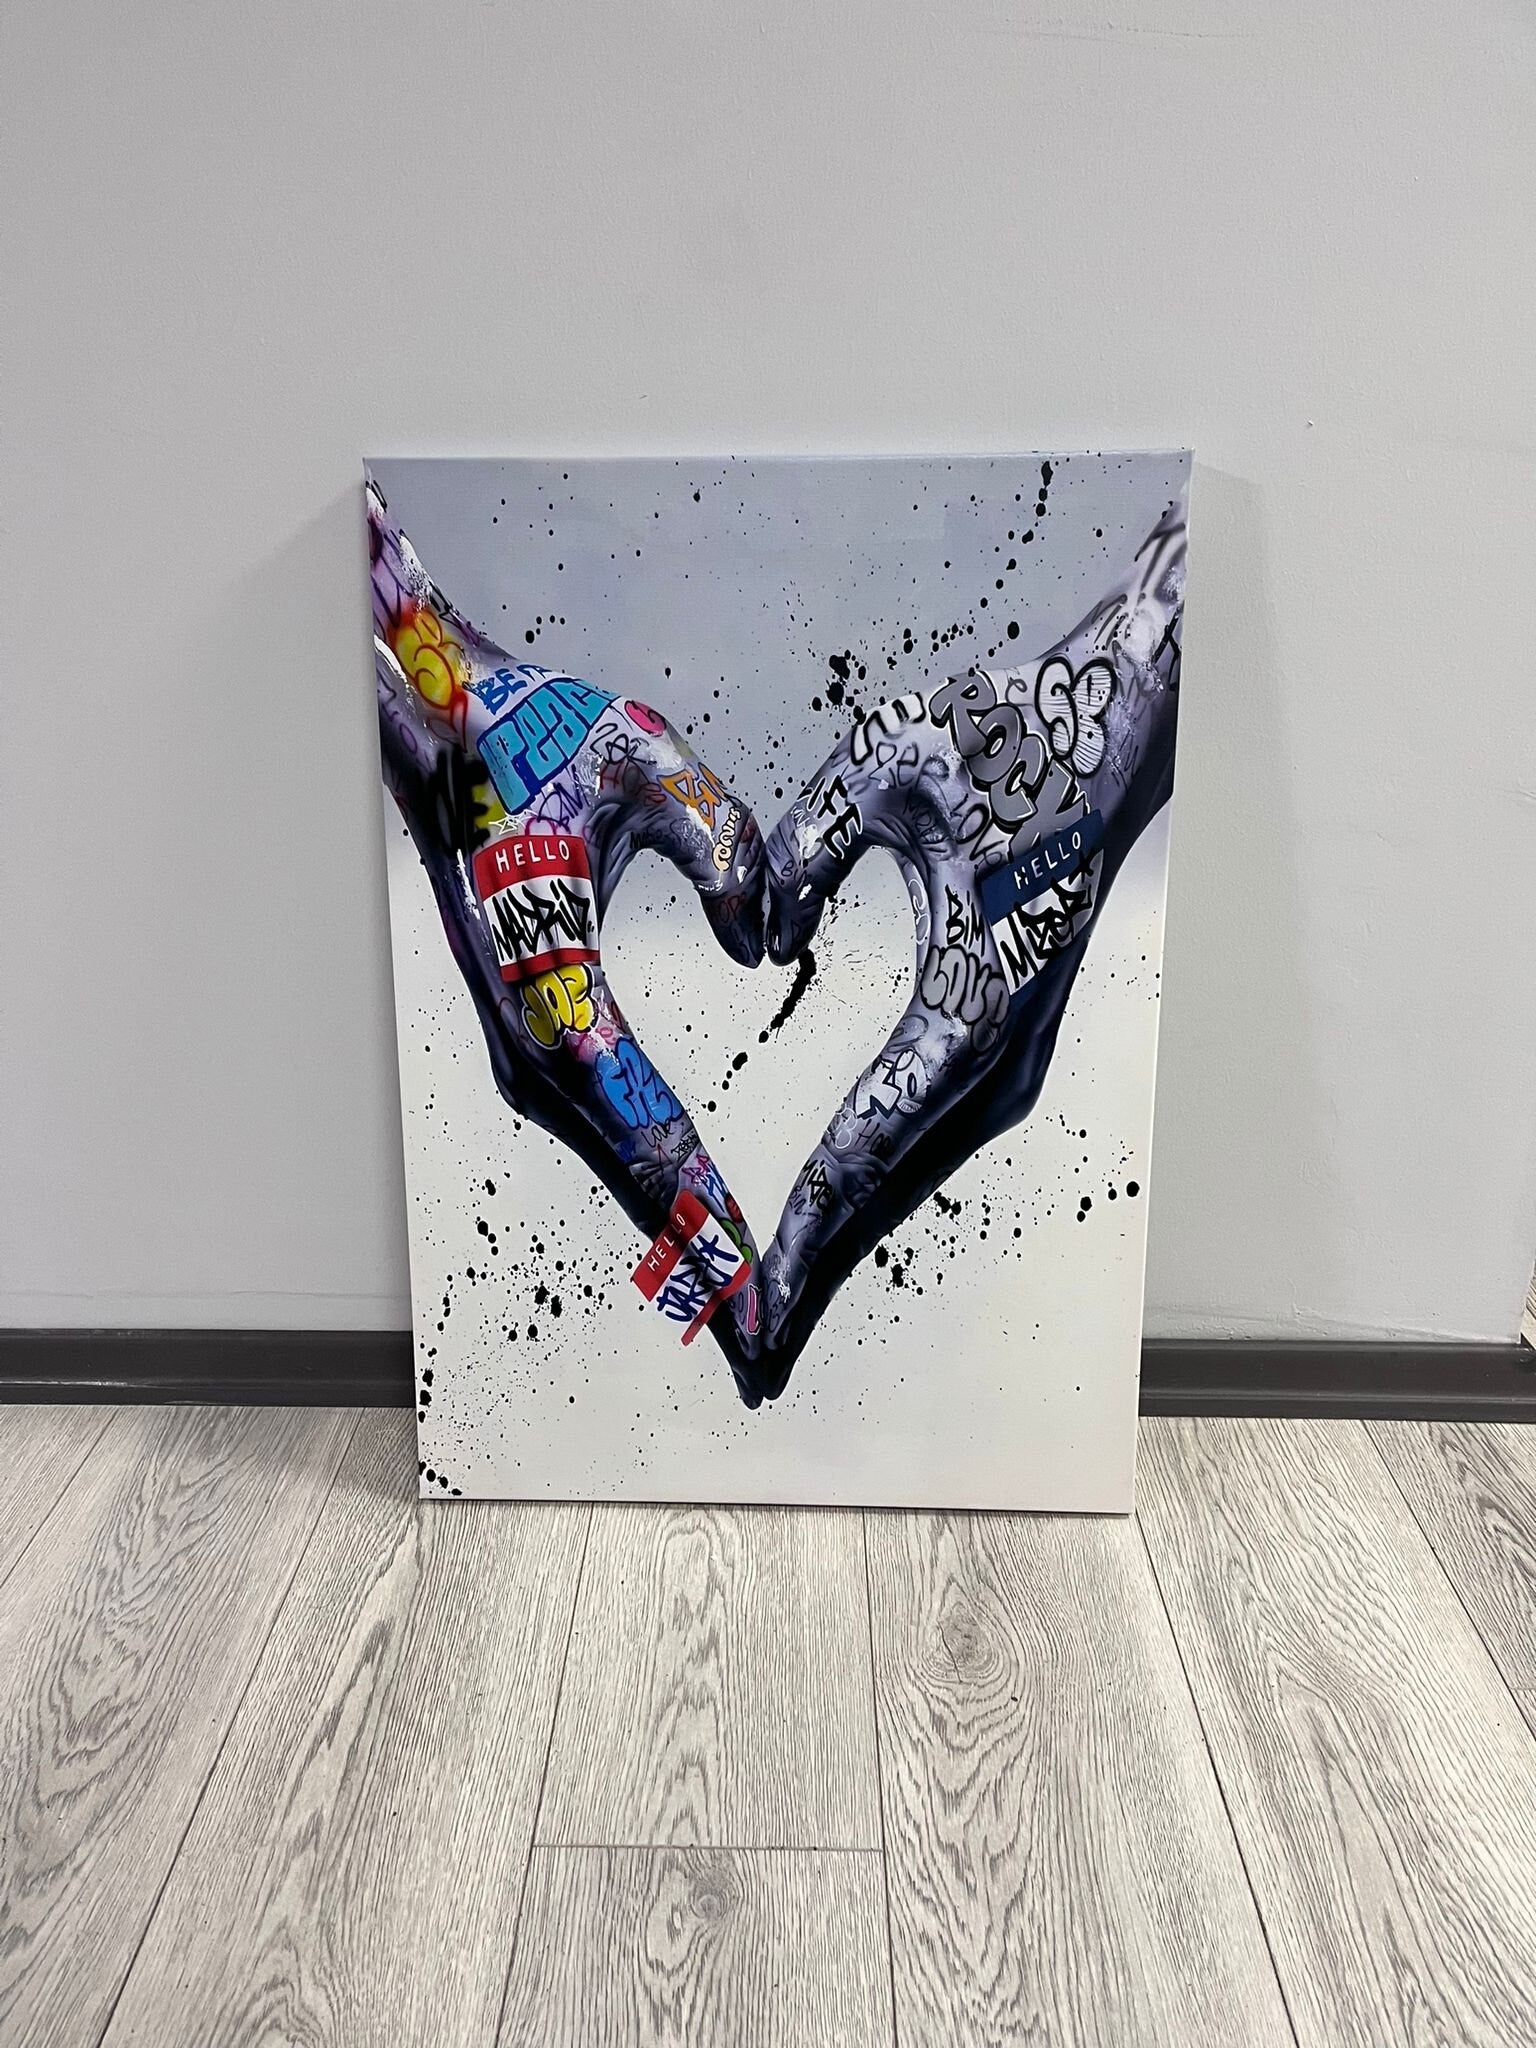 Love Heart Canvas Painting, Heart Canvas Art Print, her gift canvas, Love Canvas, love hand canvas, graffiti hand painting